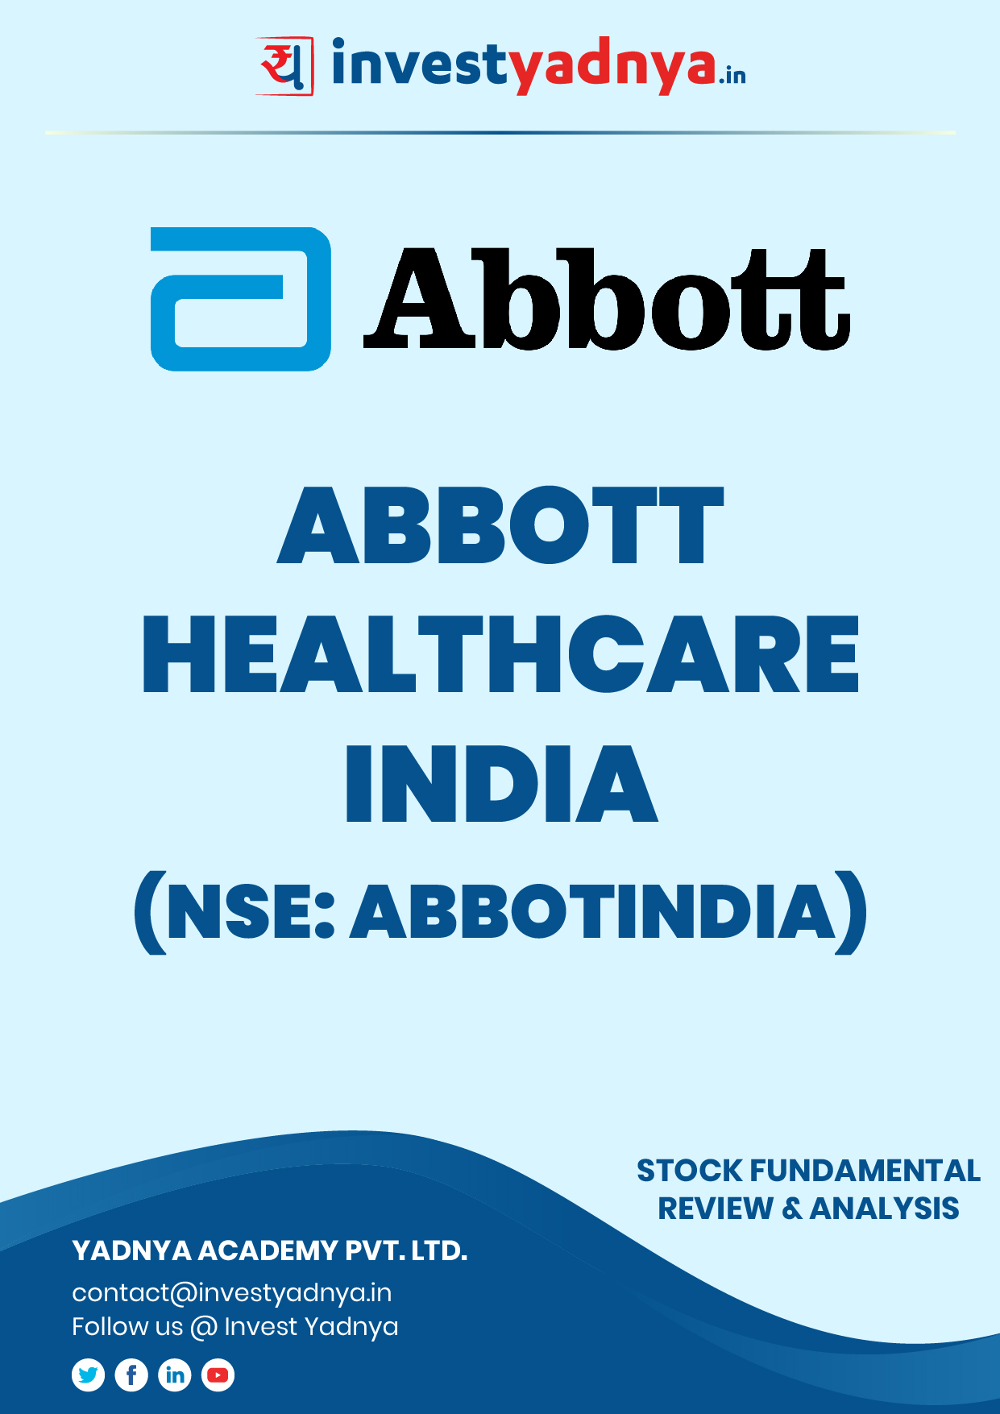 This e-book contains in-depth fundamental analysis of Abbott India considering both Financial and Equity Research Parameters. It reviews the company, industry competitors, governance, financials, and valuations. ✔ Detailed Research ✔ Quality Reports